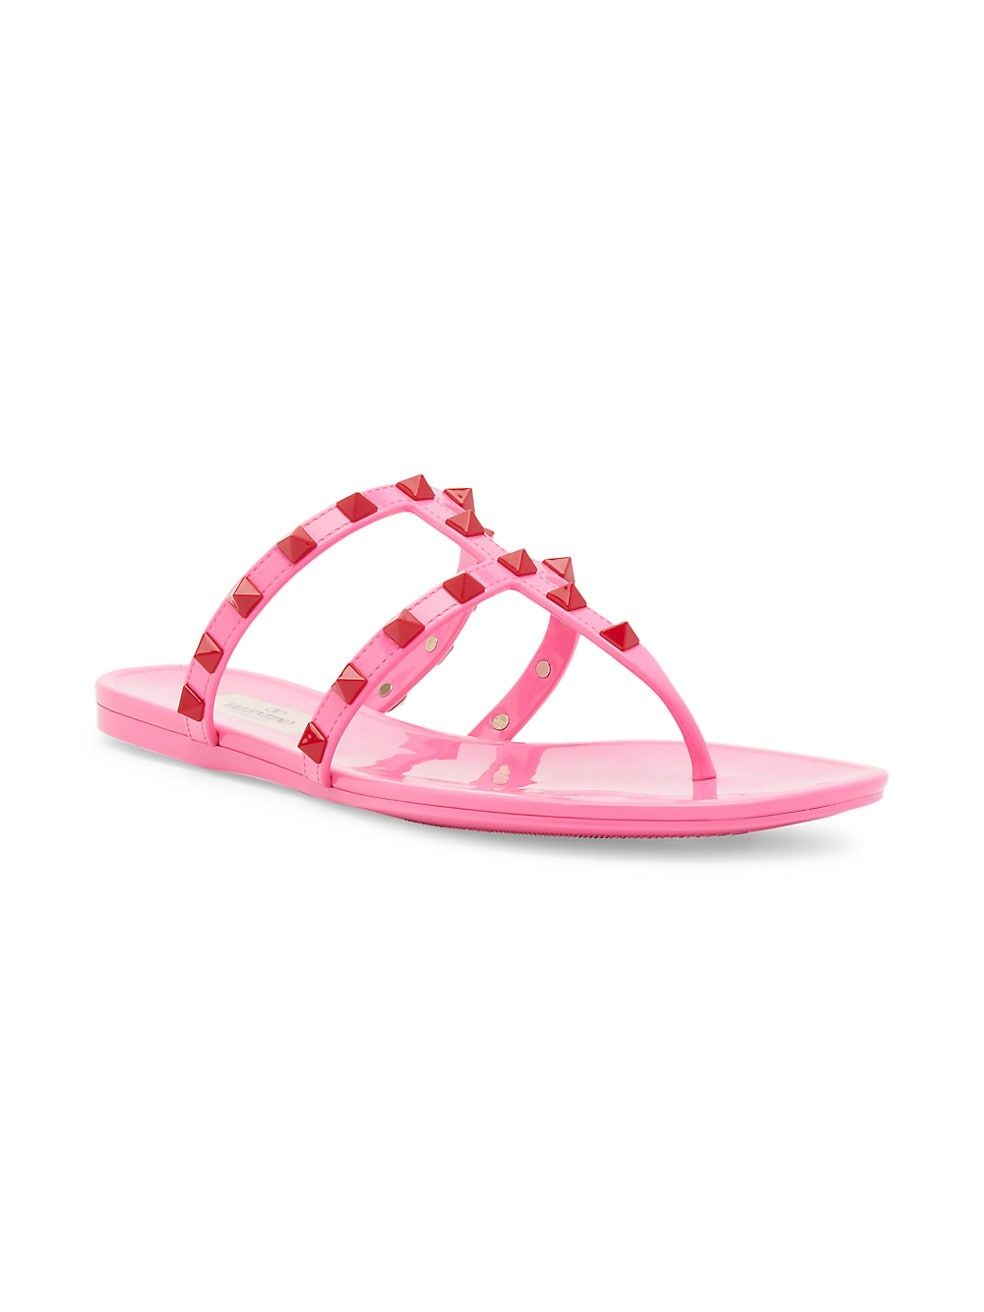 Rockstud Jelly Thong Sandals | Saks Fifth Avenue